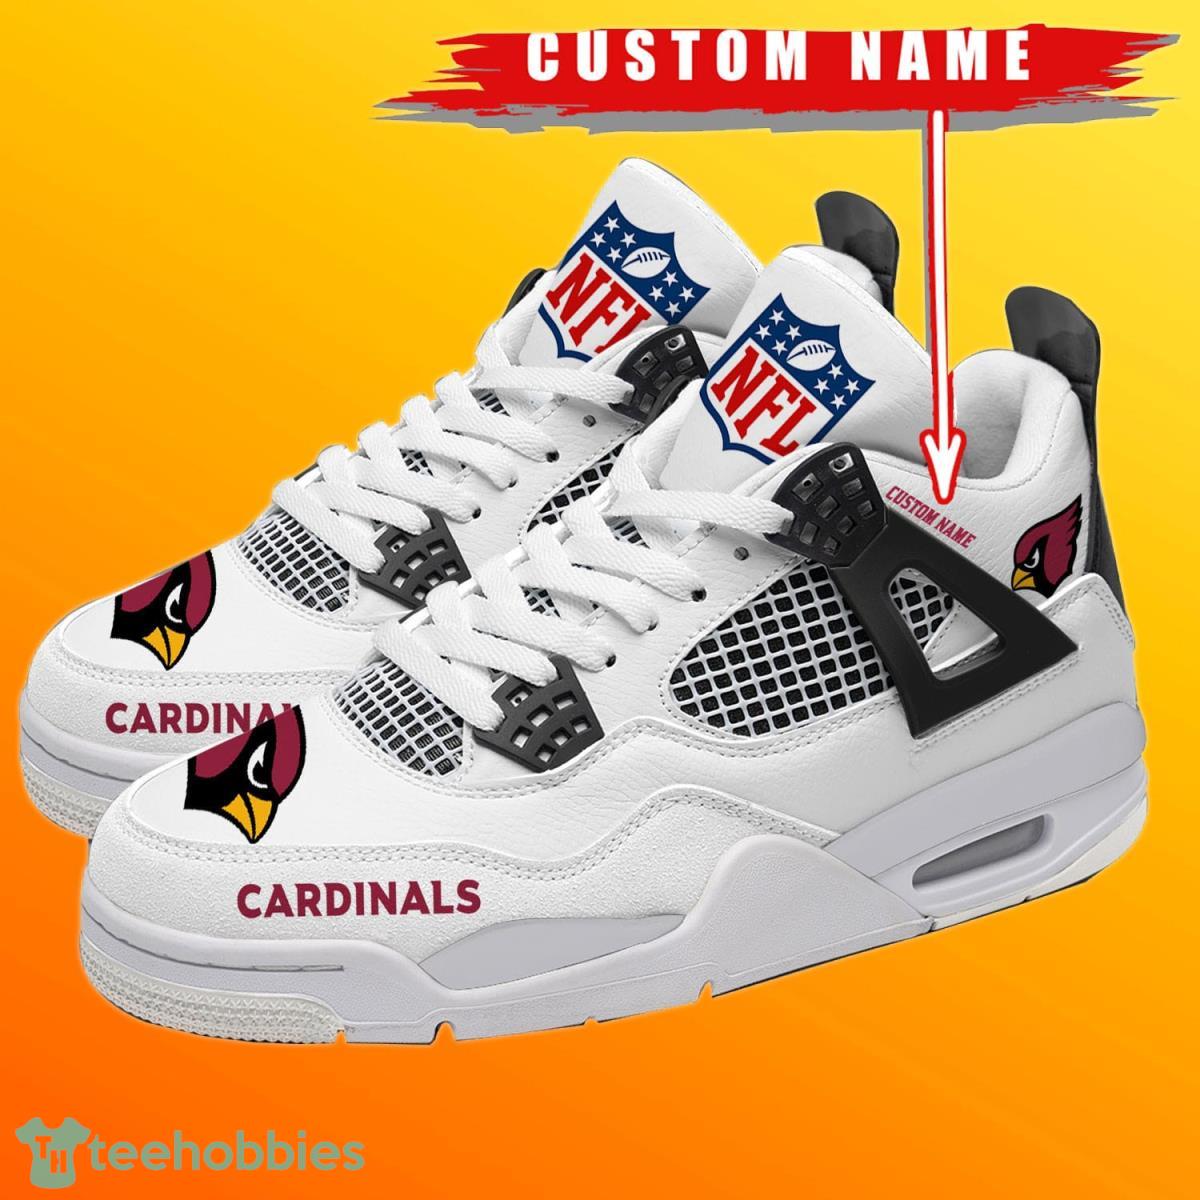 Arizona Cardinals Personalized Name NFL Air Jordan 4 Trending Sneaker Style Gift For Fans Product Photo 1